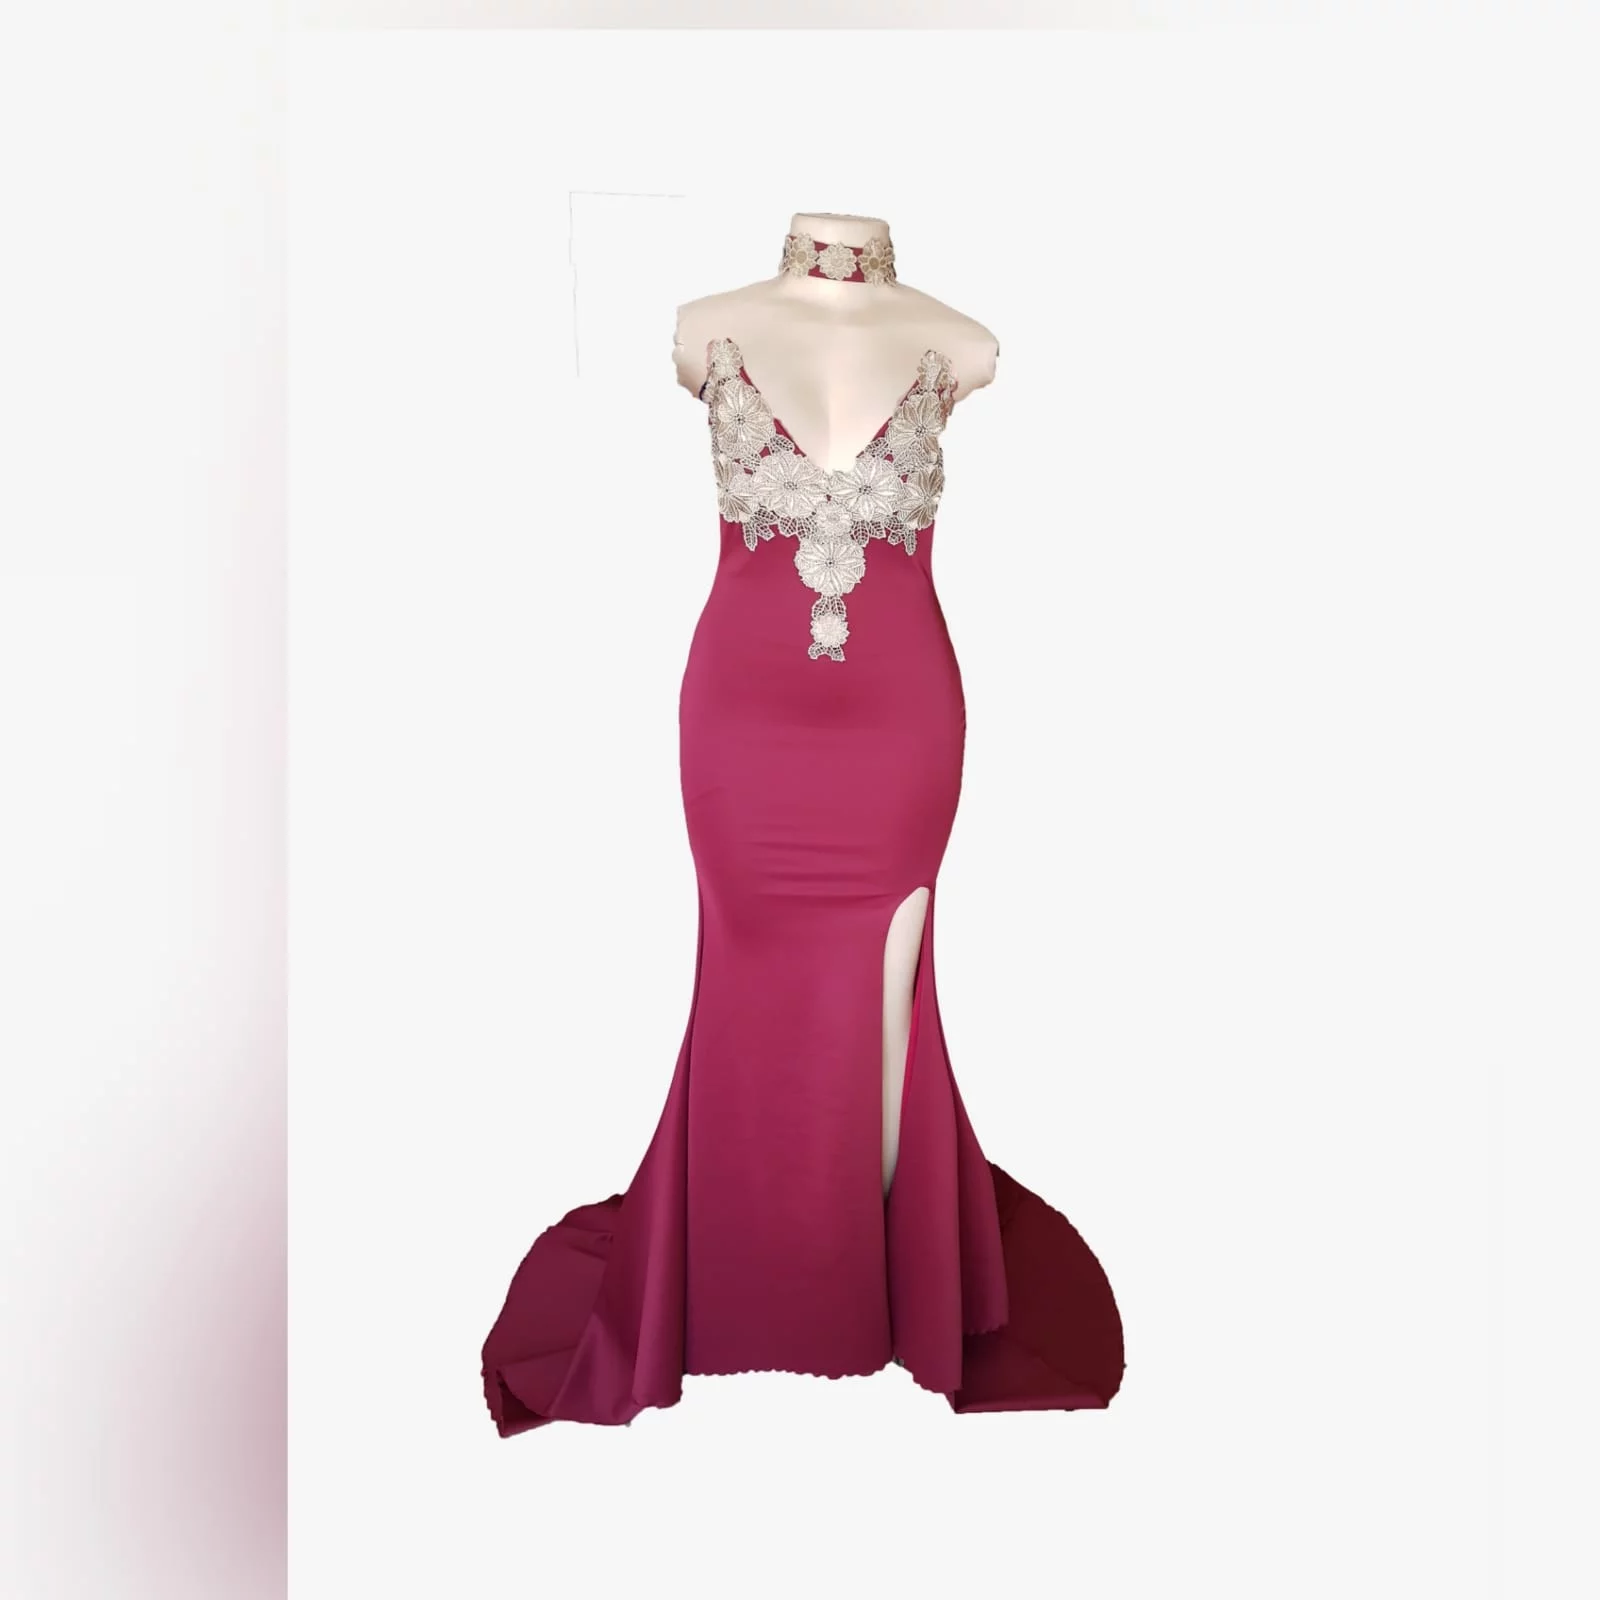 Burgundy and gold soft mermaid gala dress 4 burgundy and gold soft mermaid gala dress for a formal function. Boobtube with a v neckline, high slit and a train. Bodice detailed with gold shimmer lace. With a matching choker.